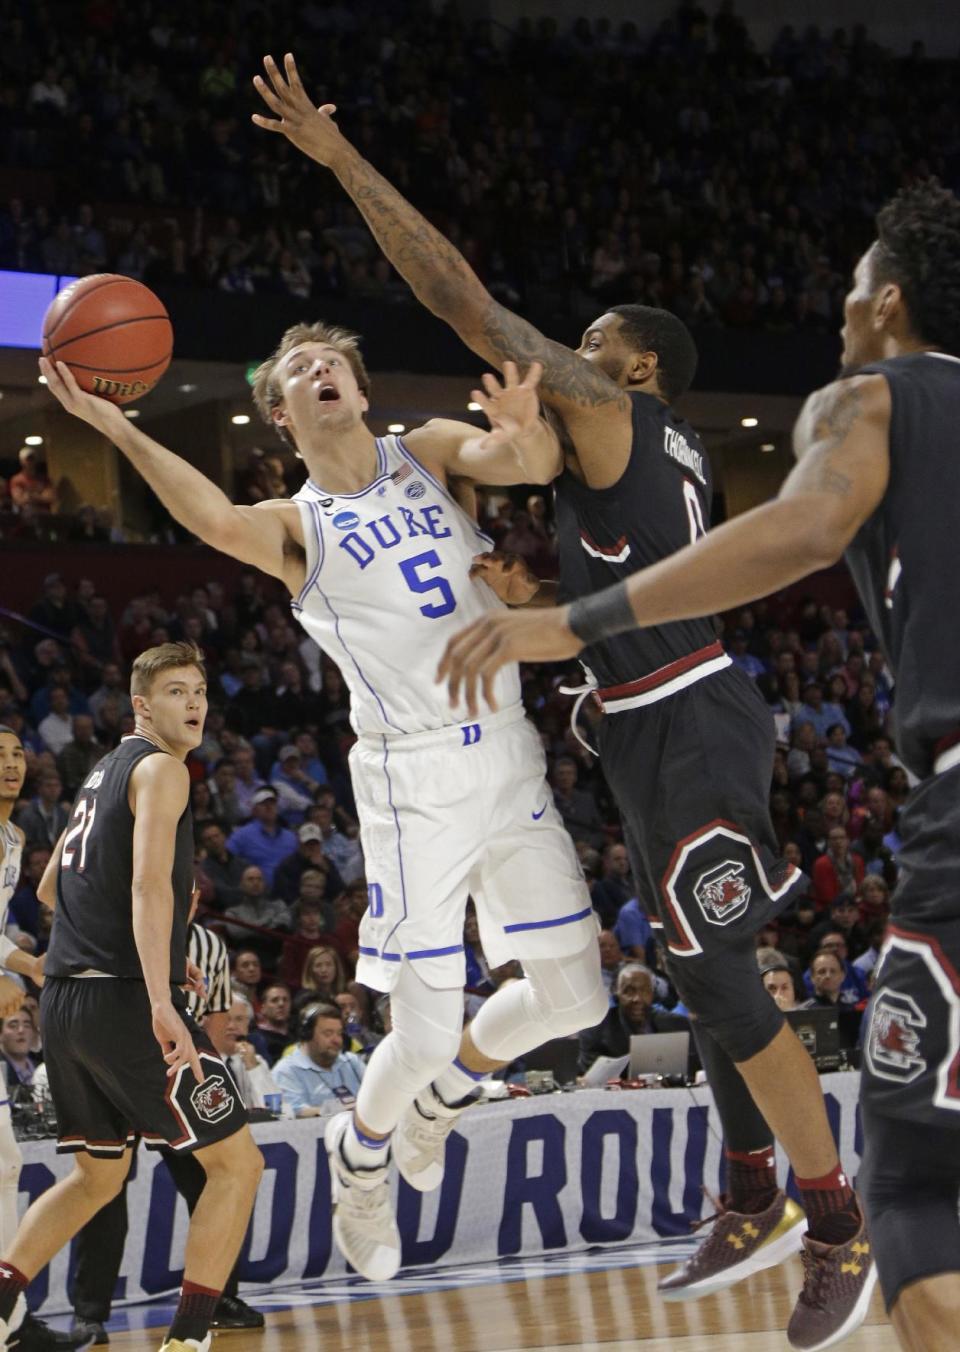 Duke's Luke Kennard (5) is fouled as he drives against South Carolina's Sindarius Thornwell (0) during the second half in a second-round game of the NCAA men's college basketball tournament in Greenville, S.C., Sunday, March 19, 2017. (AP Photo/Chuck Burton)